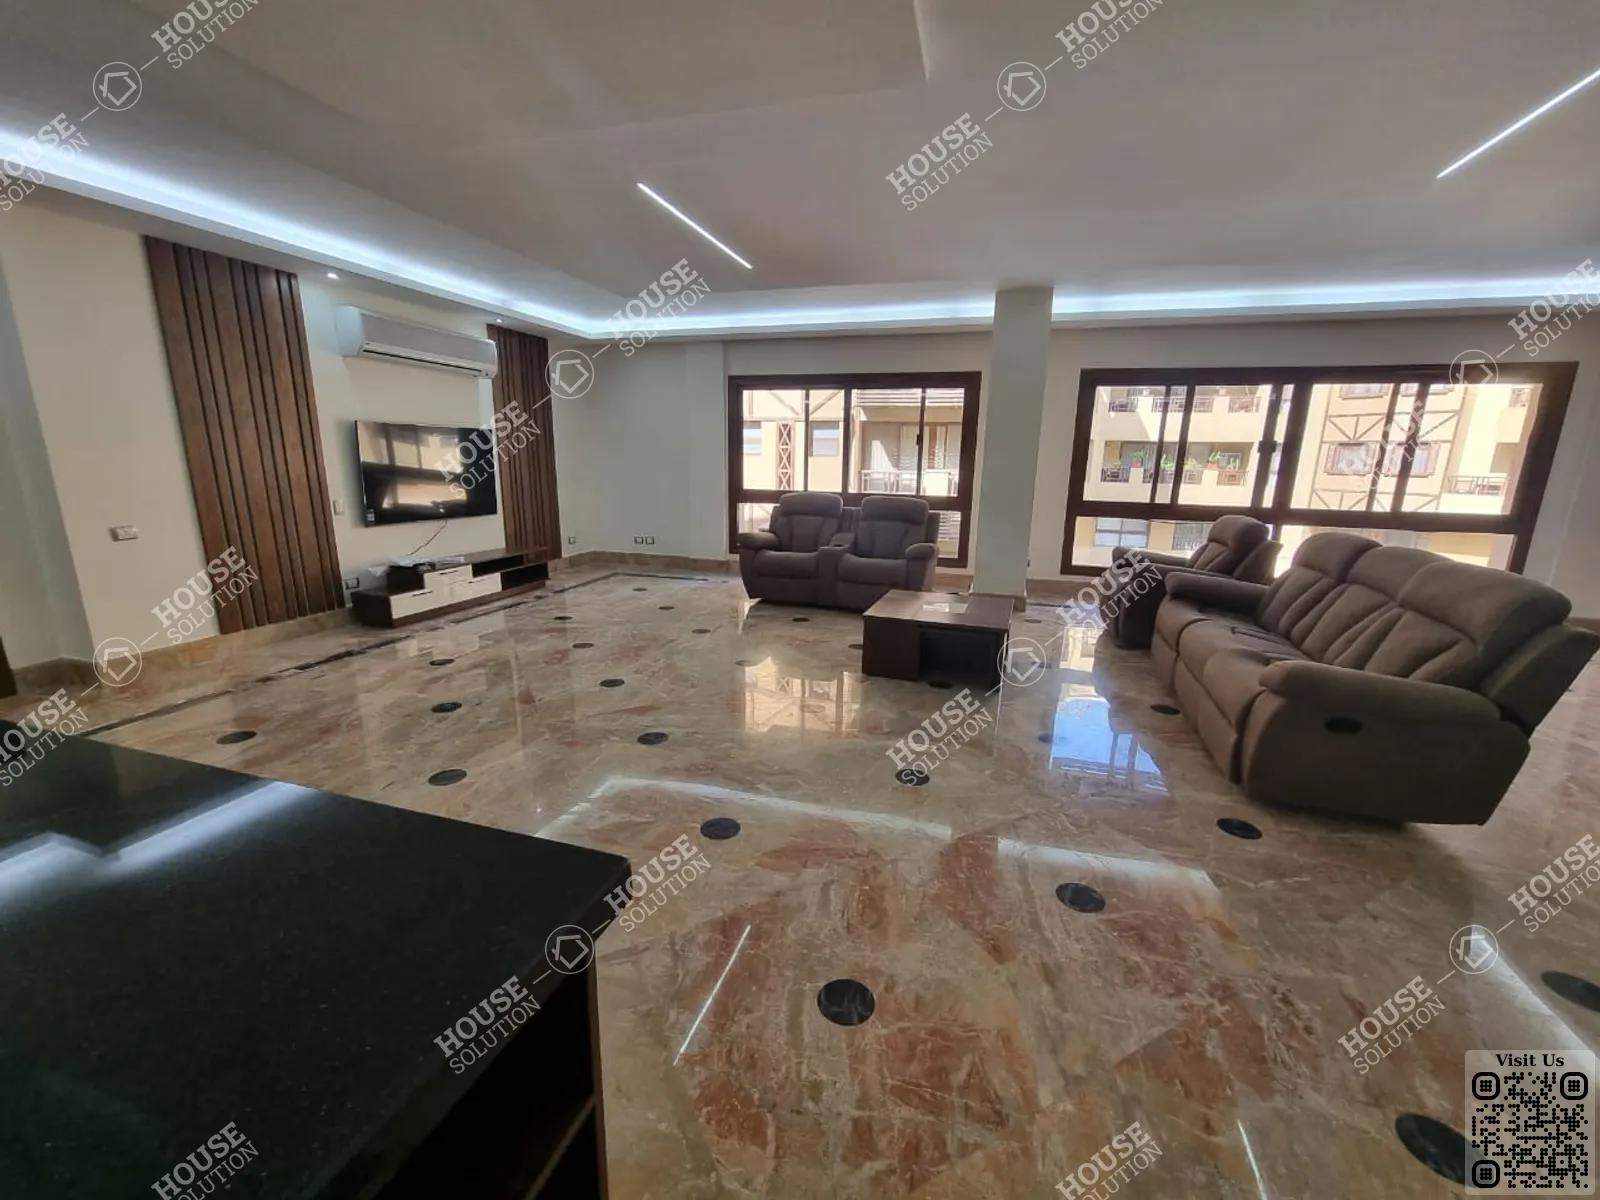 RECEPTION  @ Apartments For Rent In Maadi Maadi Sarayat Area: 320 m² consists of 3 Bedrooms 5 Bathrooms Modern furnished 5 stars #5671-0